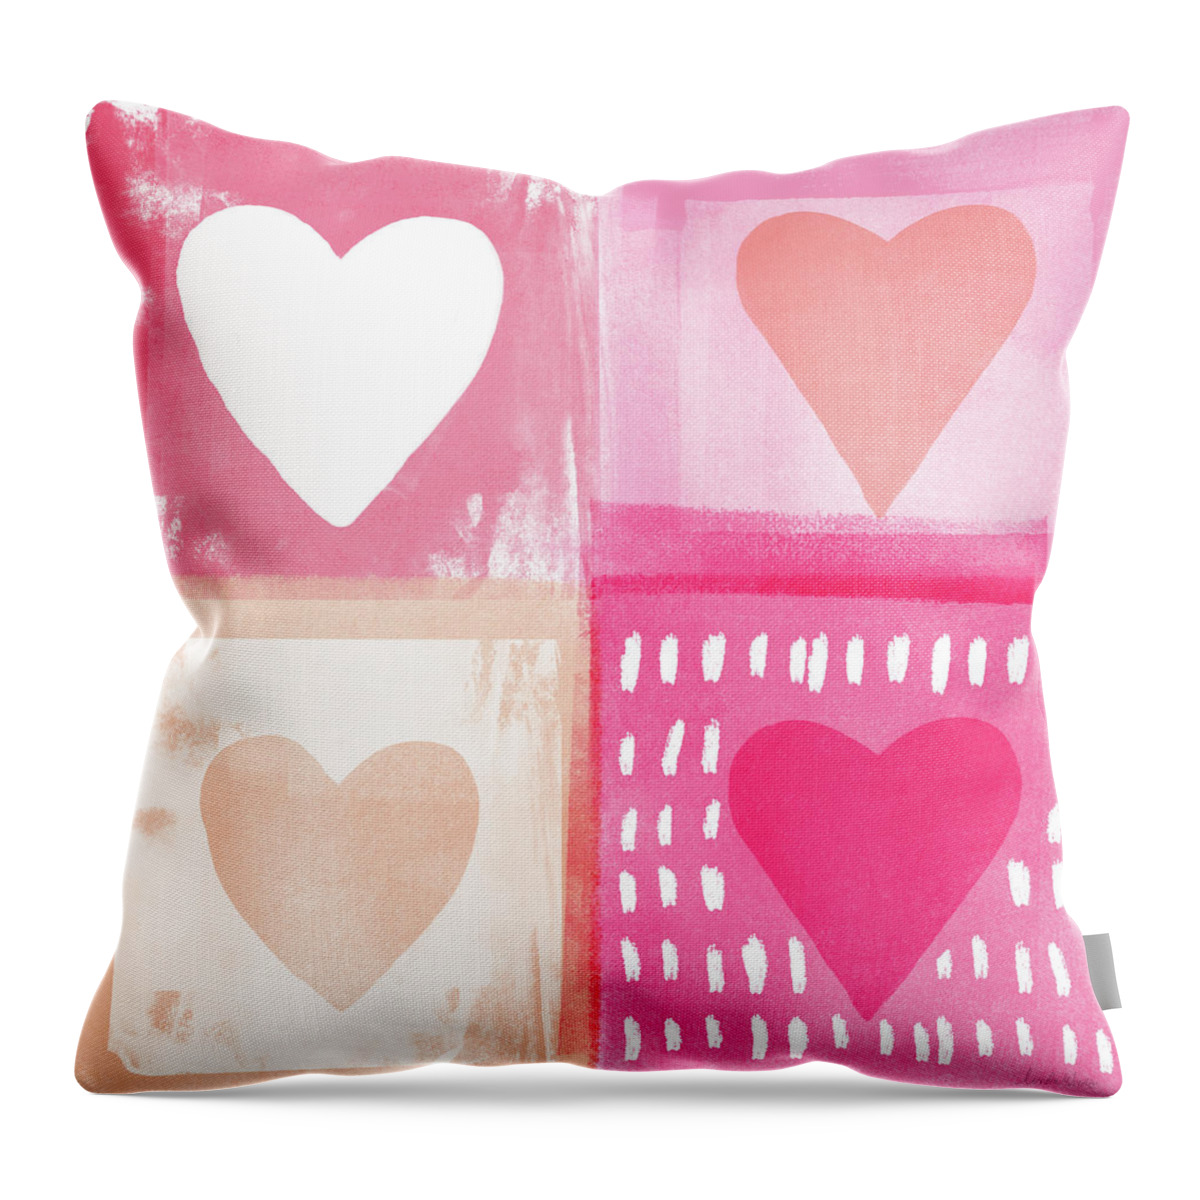 Hearts Throw Pillow featuring the mixed media Four Hearts- Art by Linda Woods by Linda Woods